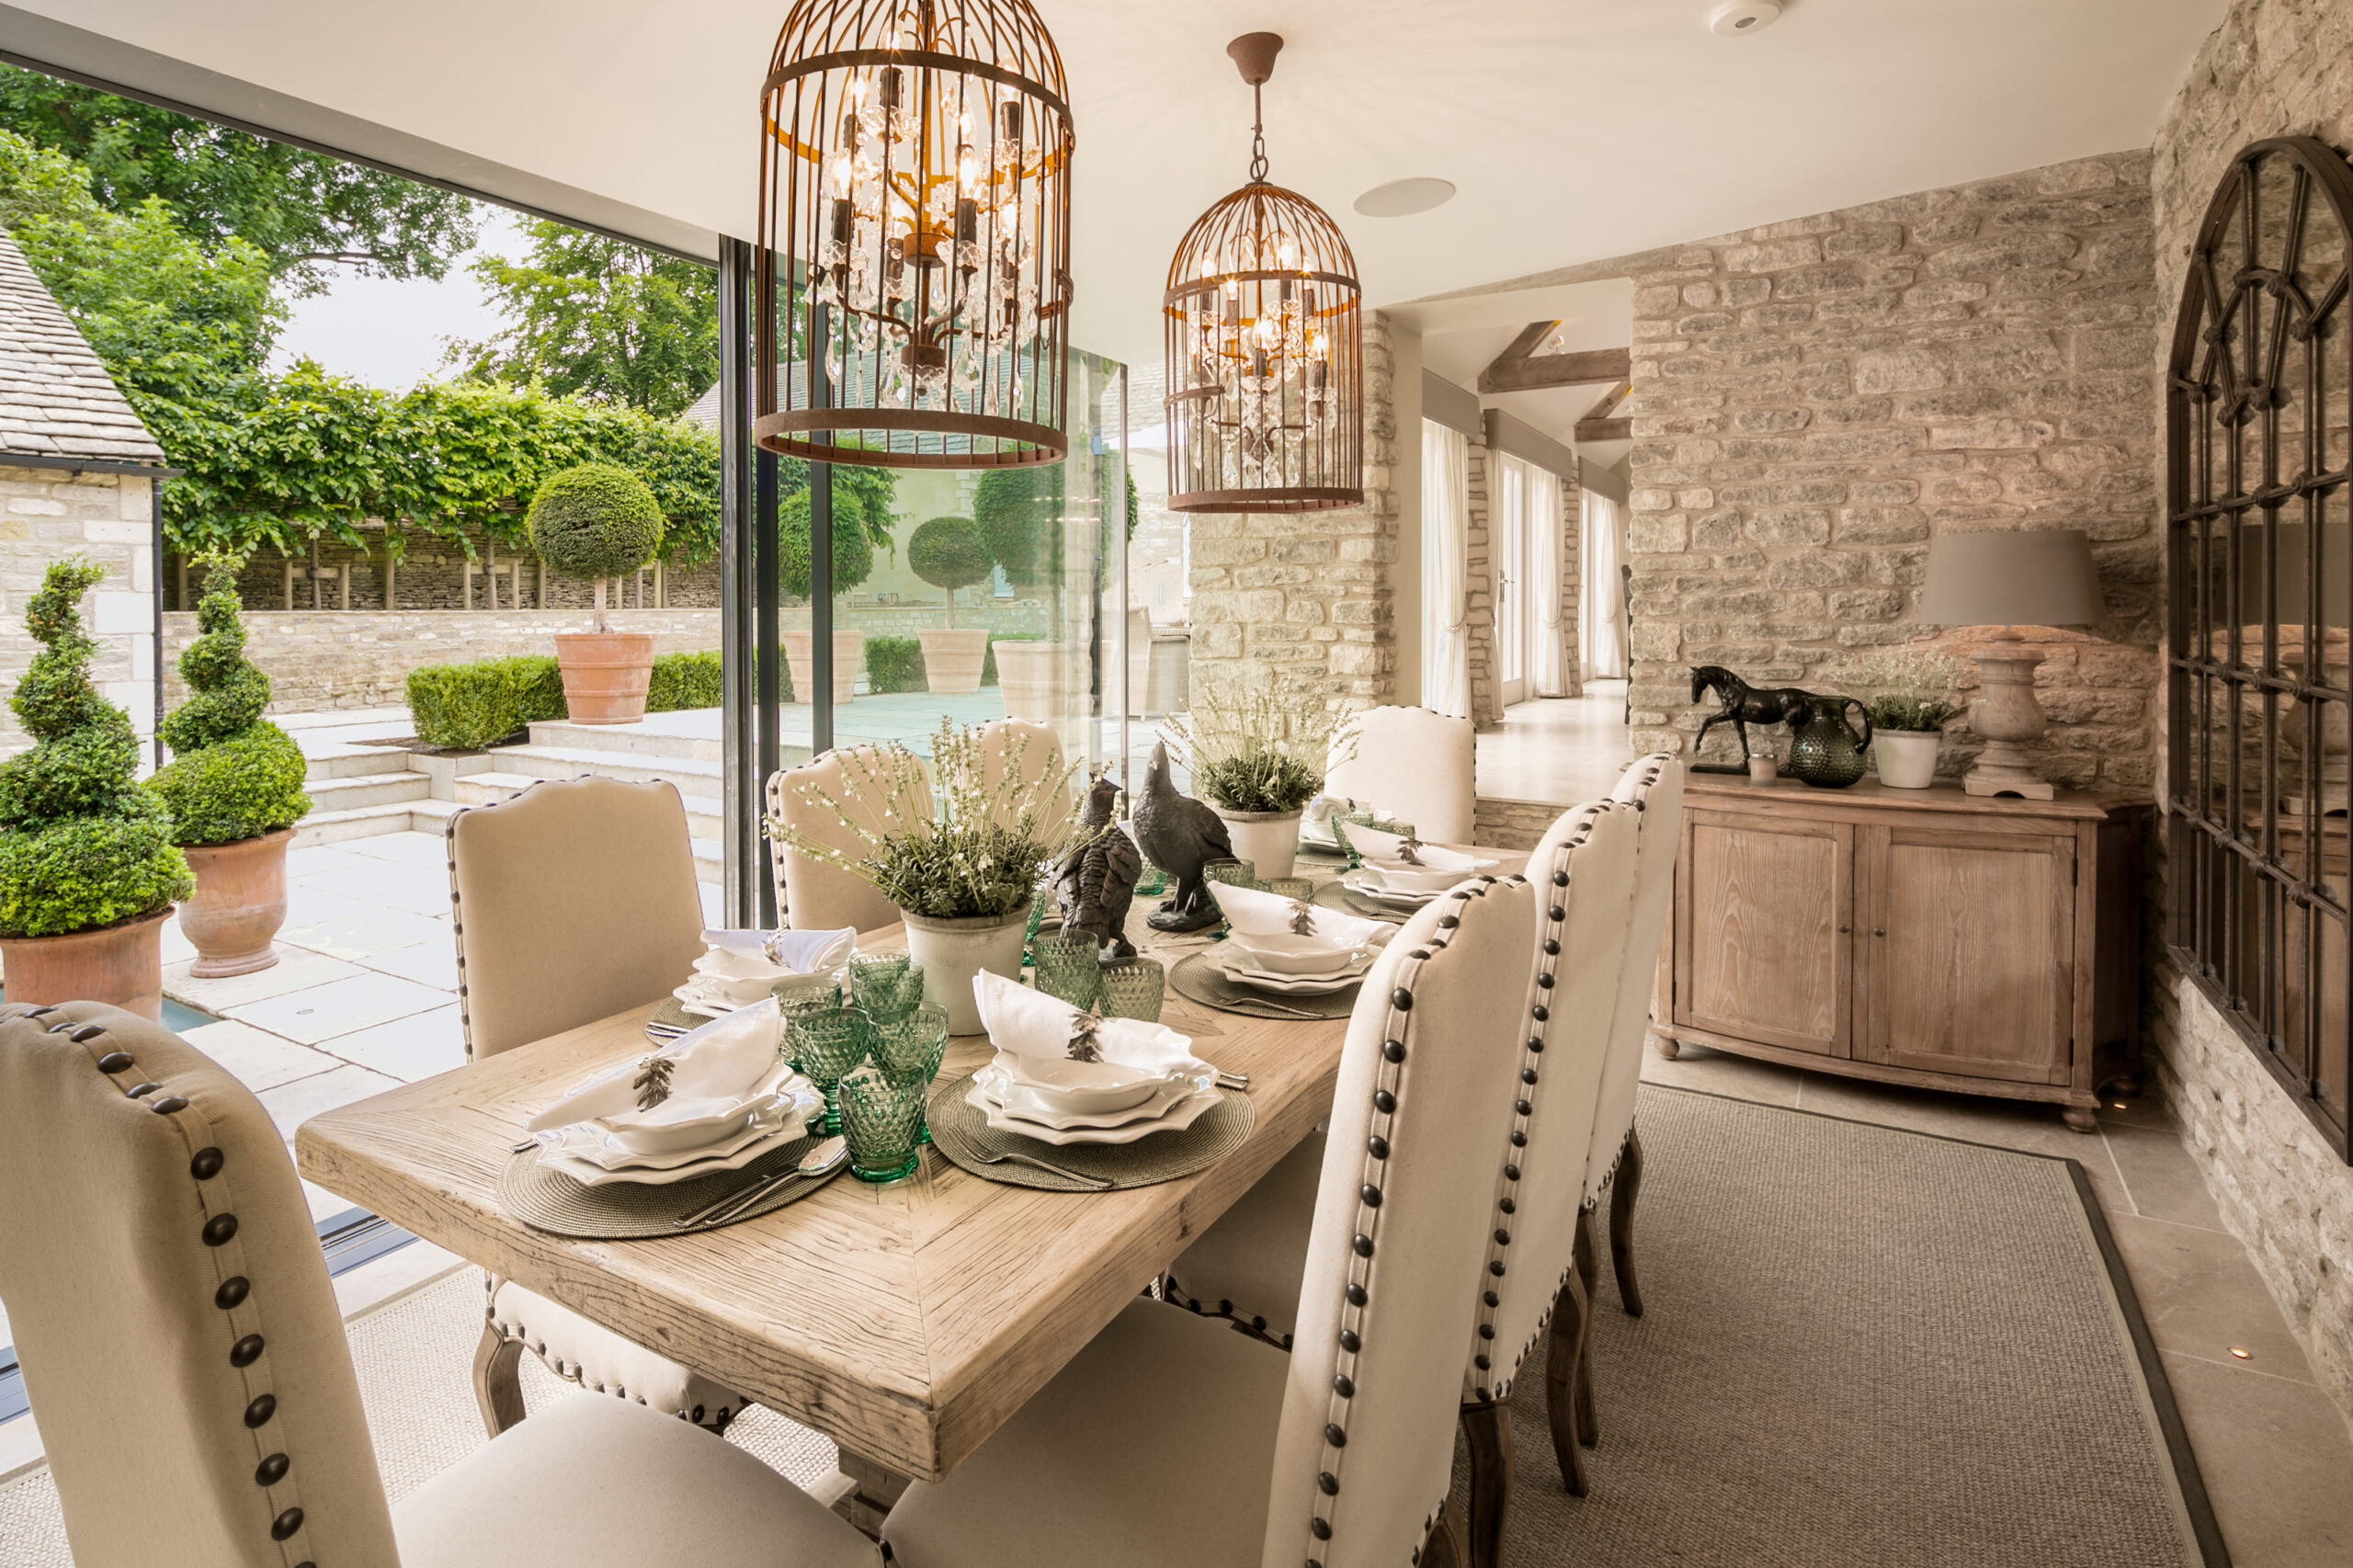 Luxury home featuring dining table and white chairs, outdoor setting